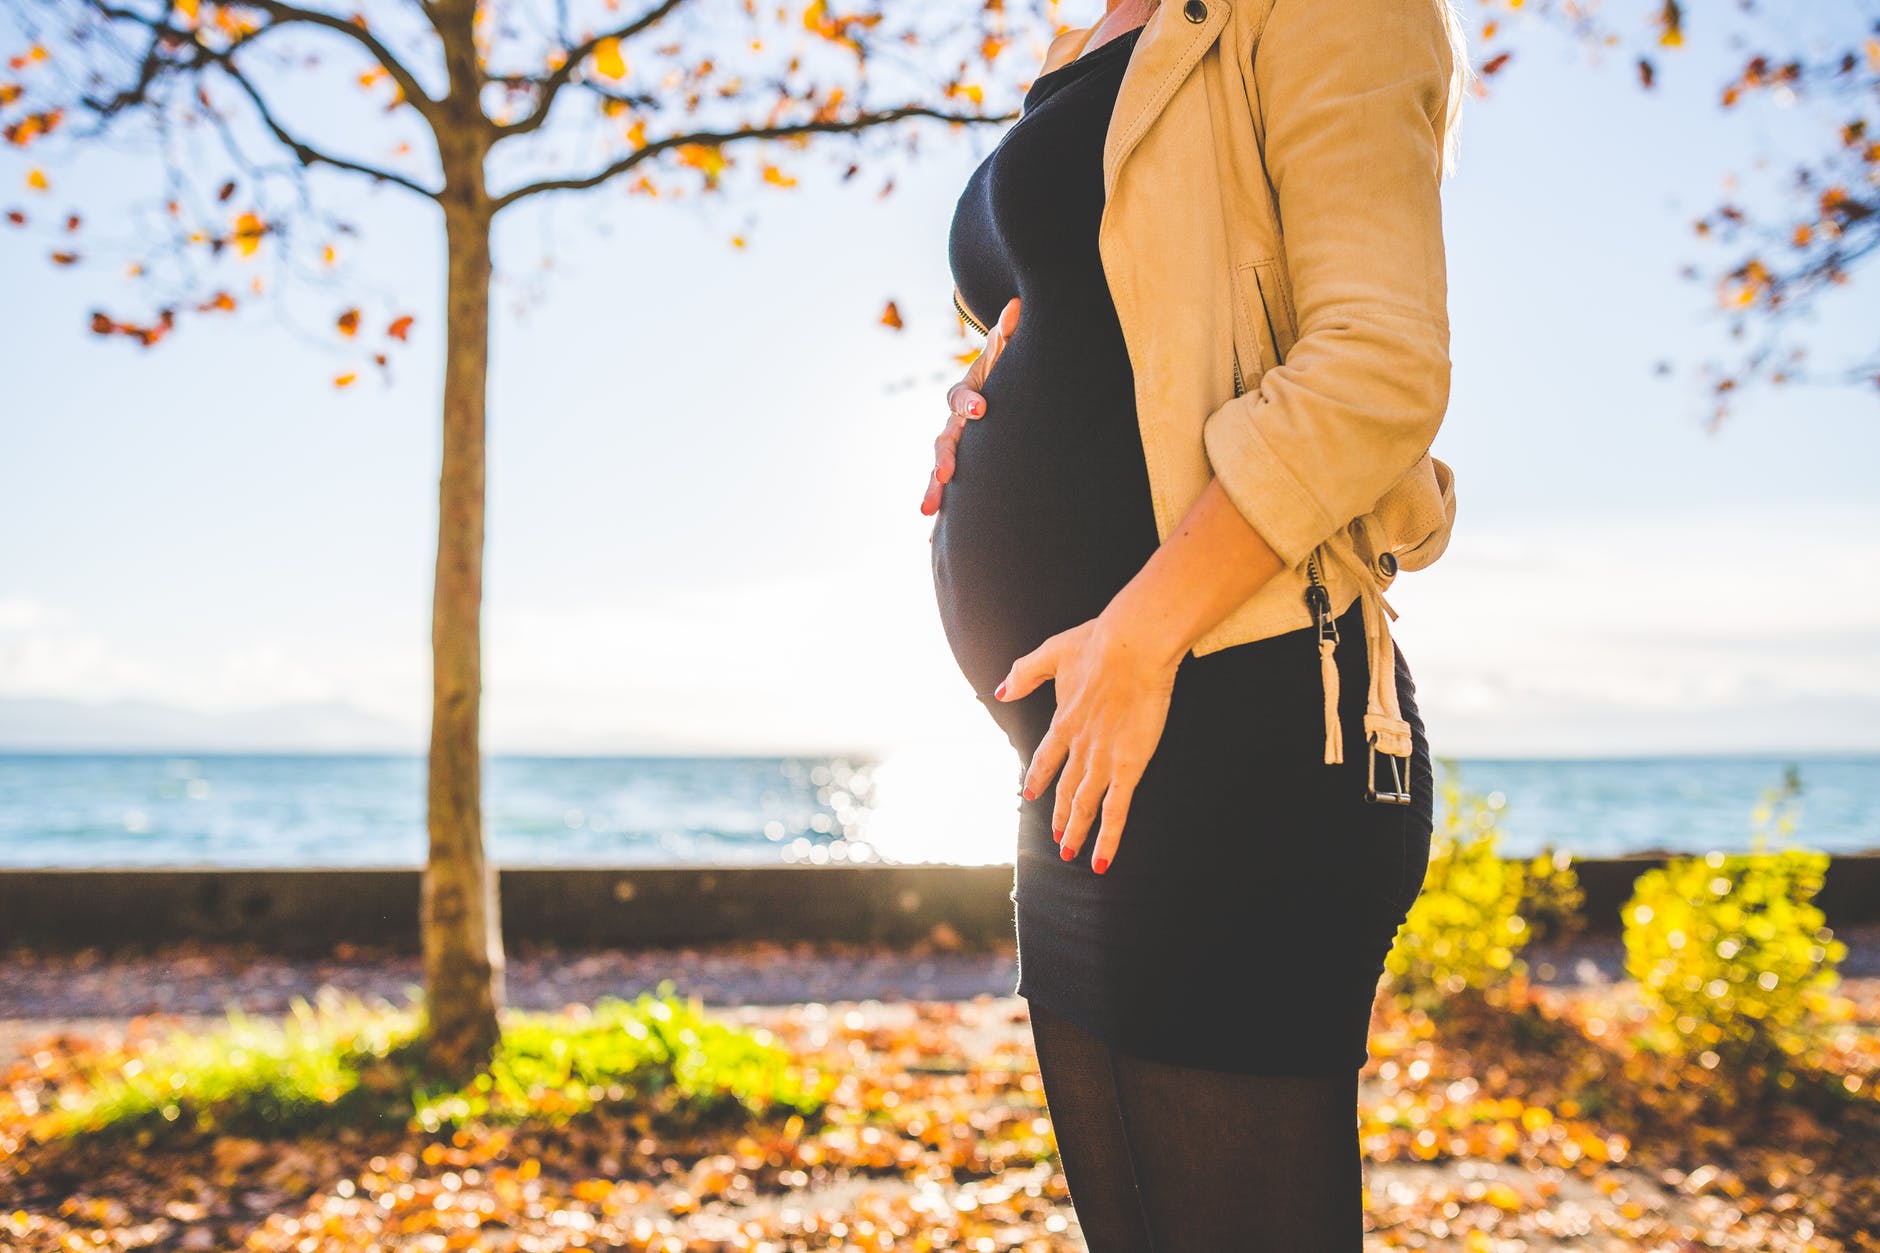 Know your body – what changes to expect during pregnancy